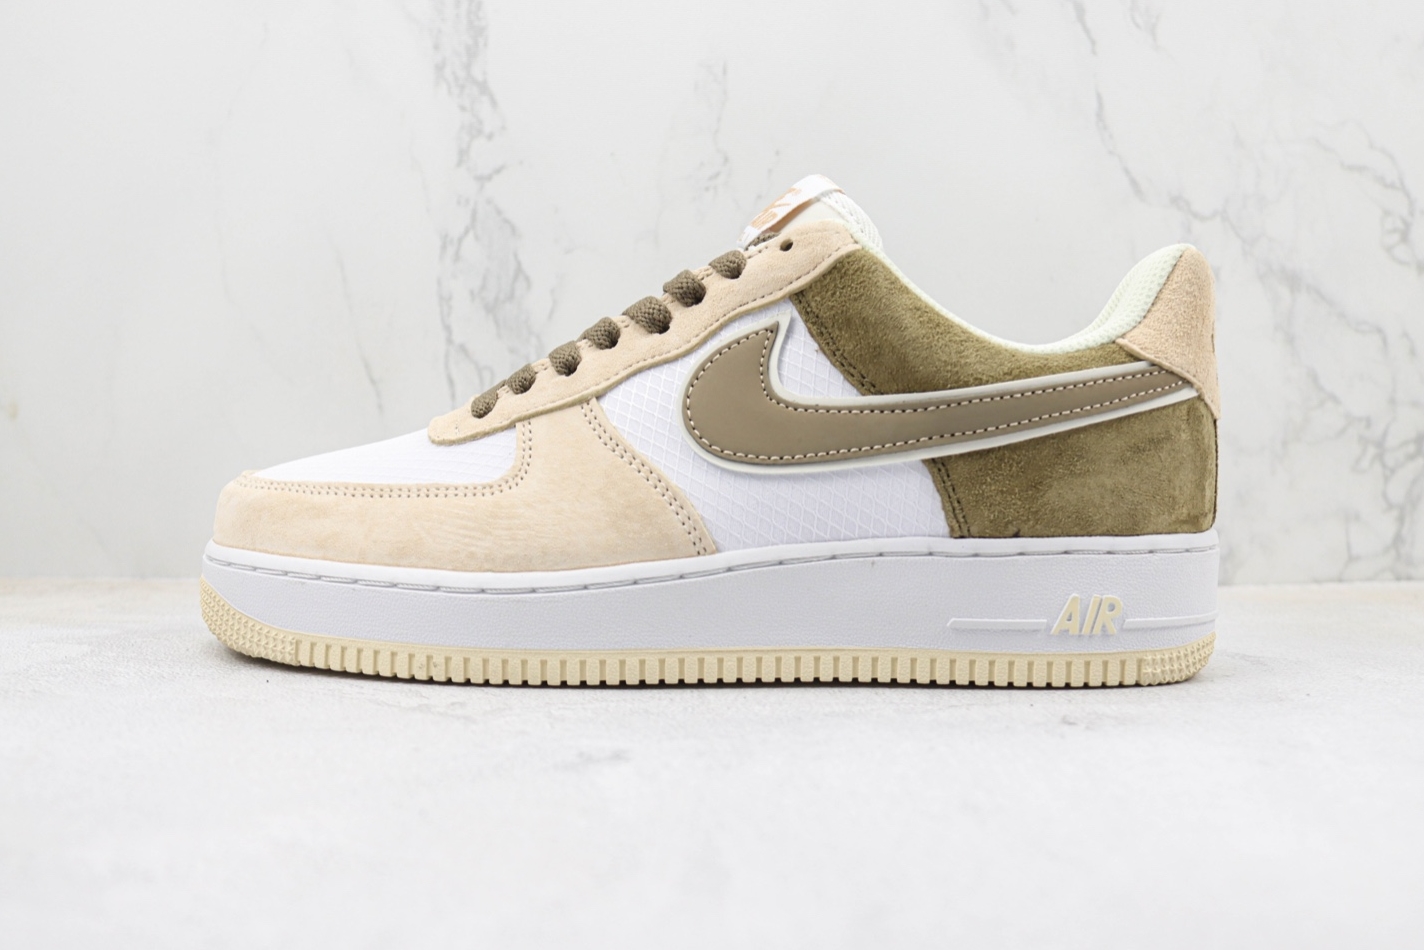 Shop Nike Air Force 1 Low Yellow Brown White Shoes CW2288-701 | Stylish and Comfortable Sneakers